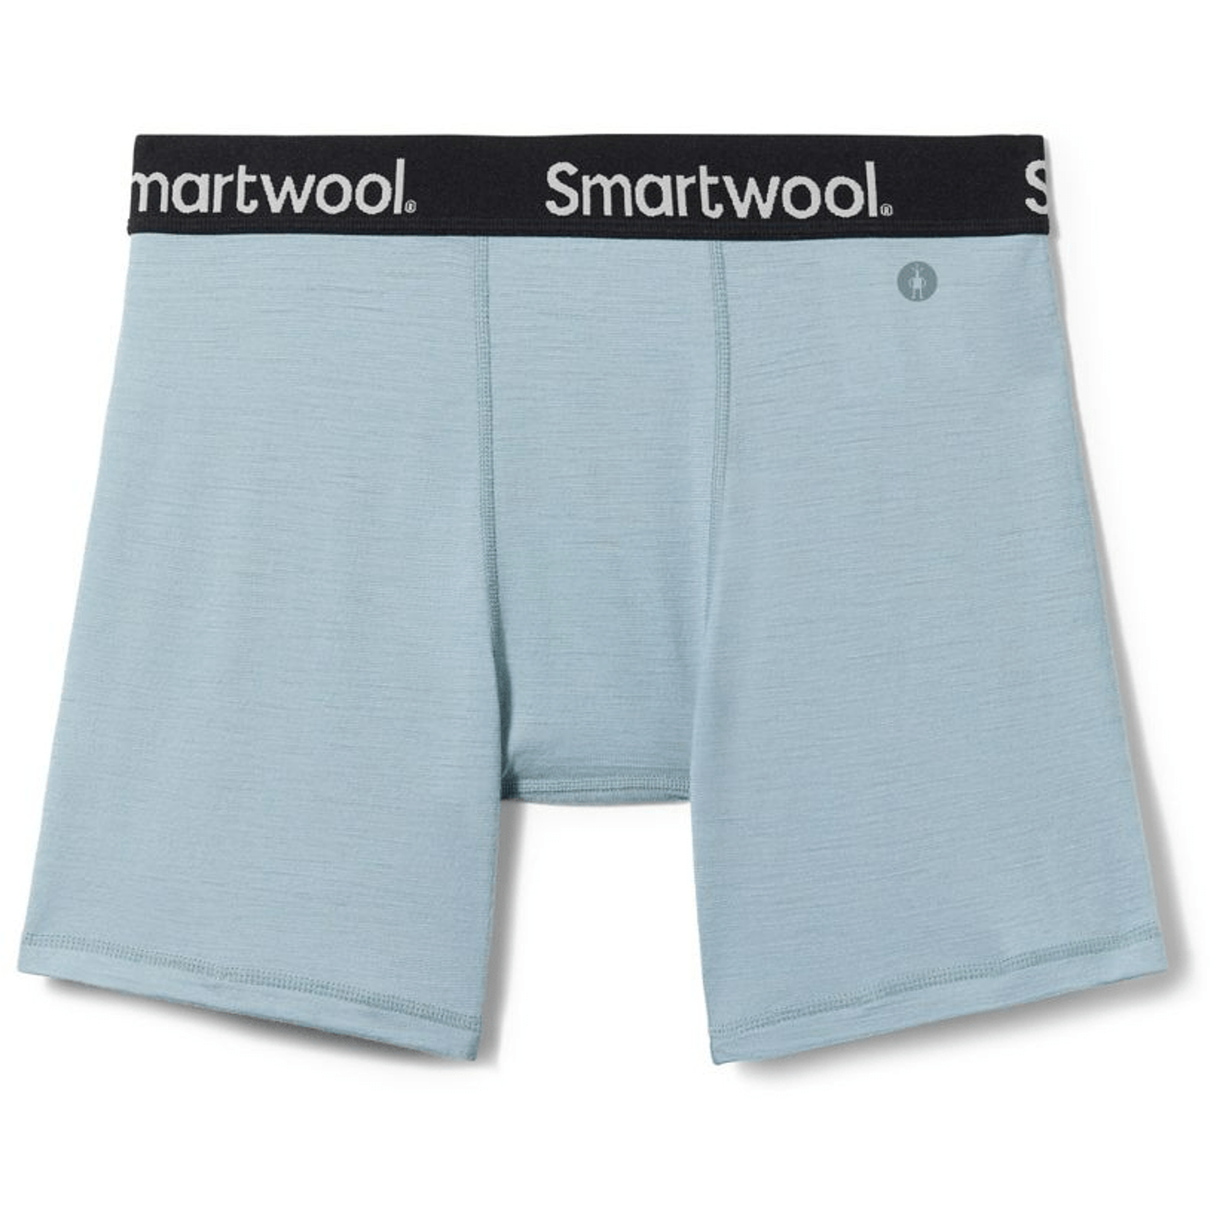 Smartwool Mens Boxer Brief  -  Small / Lead